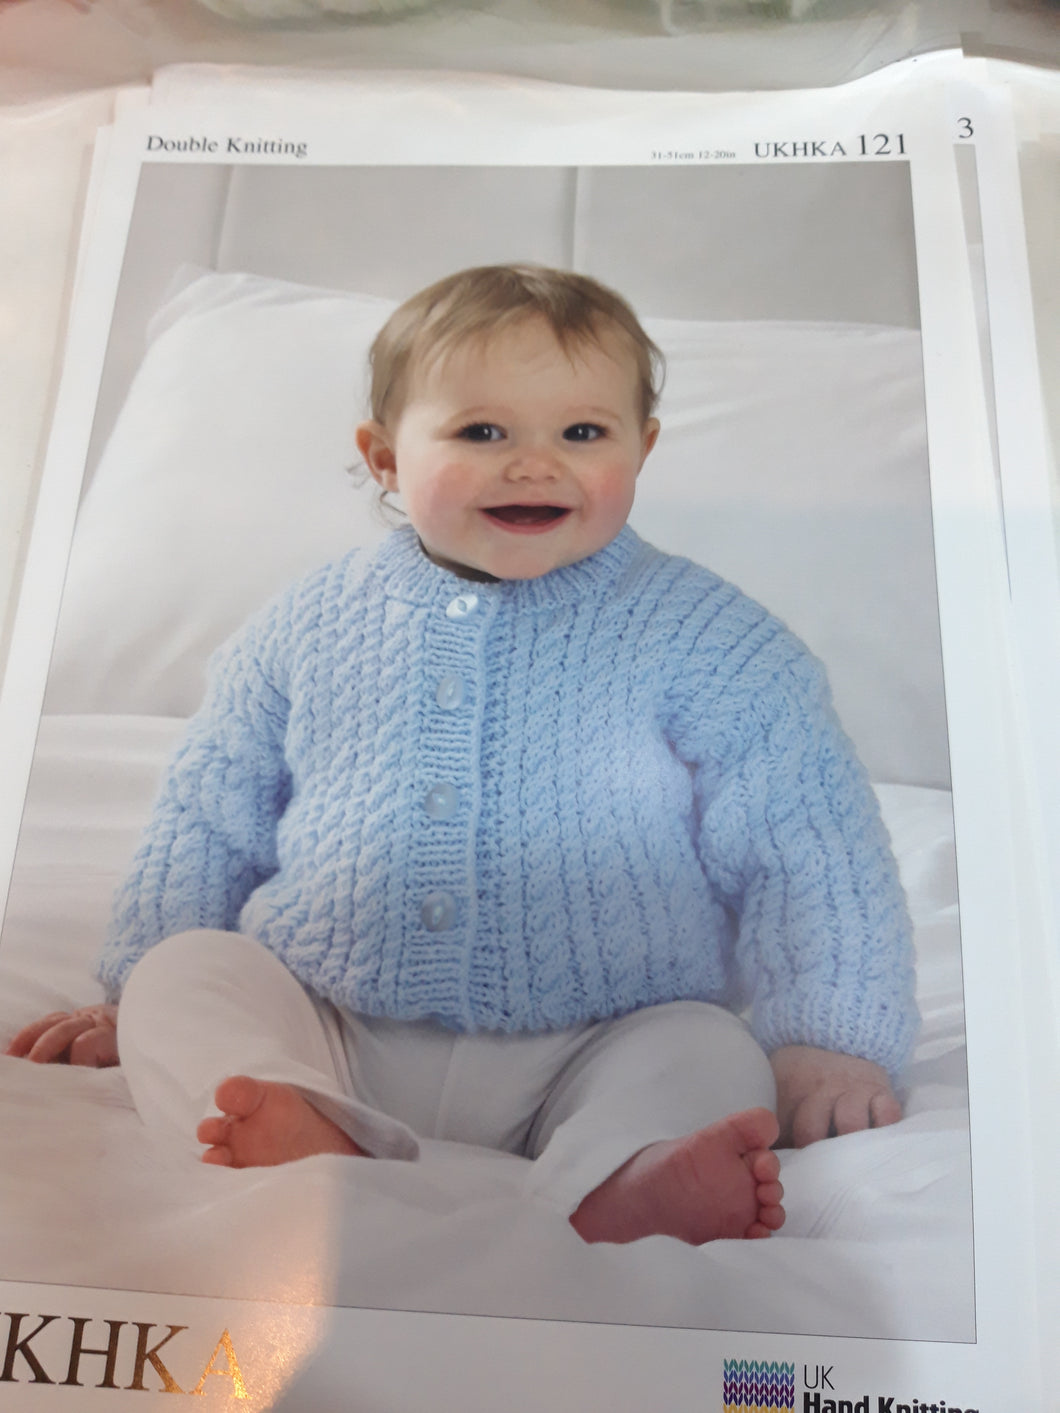 UKHKA 121 - Baby Double Knit - Cardigan, Hat and Blanket - 12